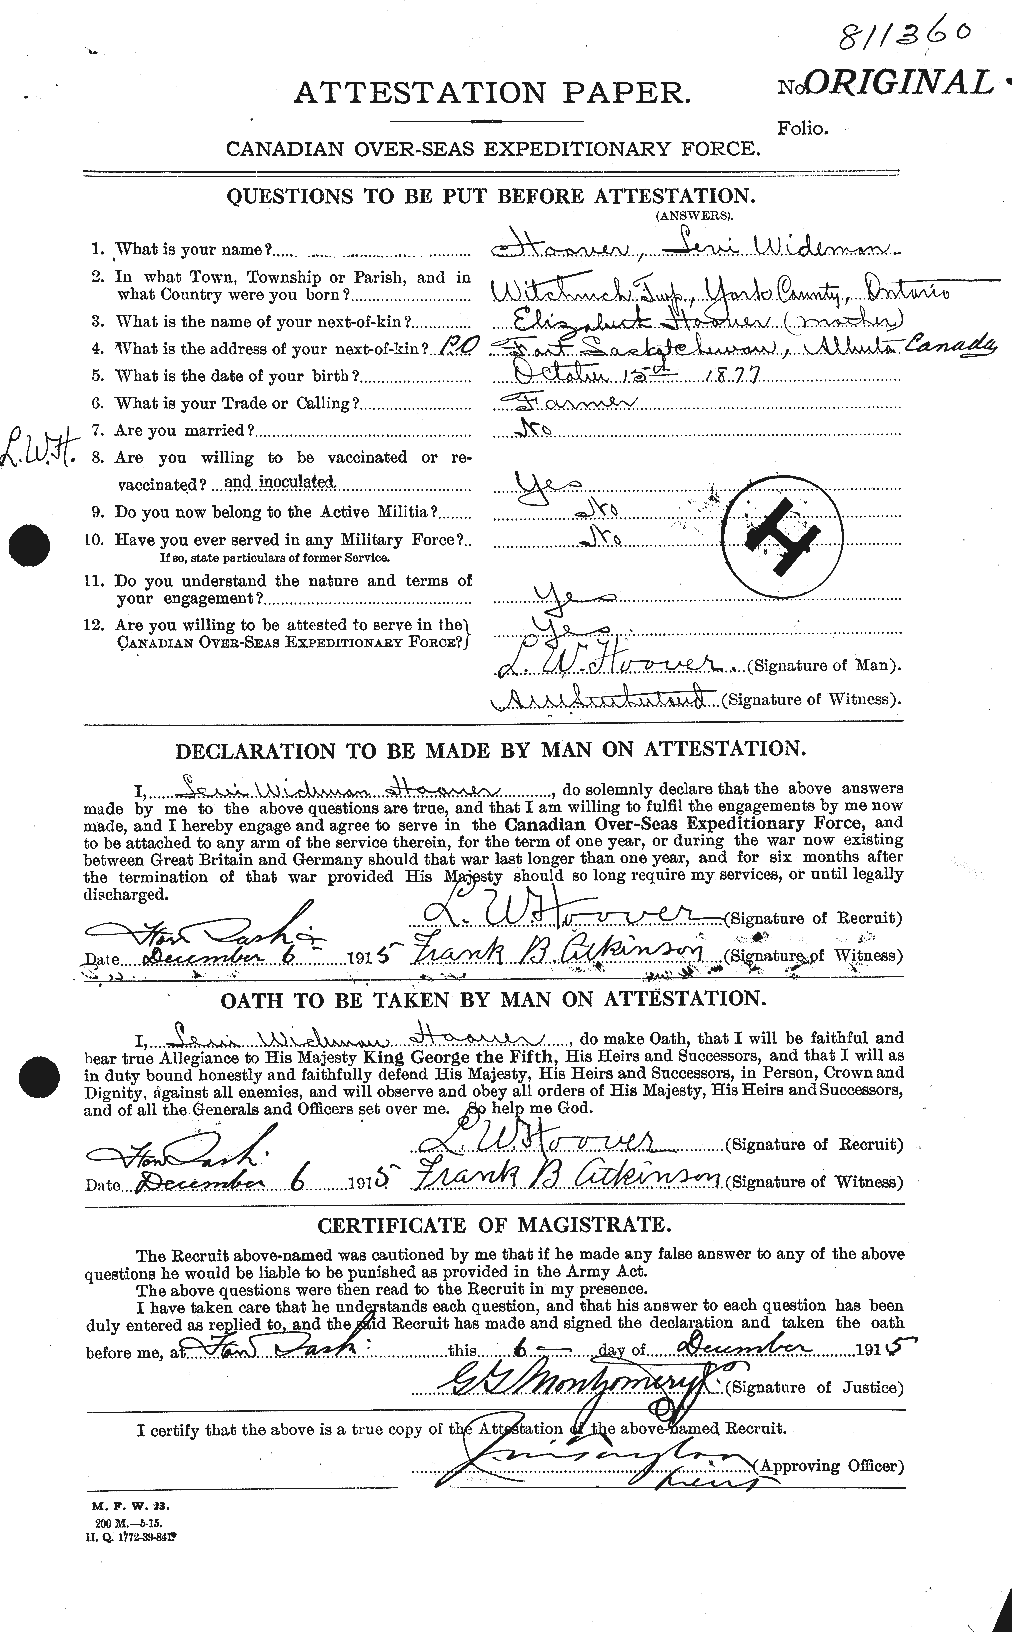 Personnel Records of the First World War - CEF 399290a